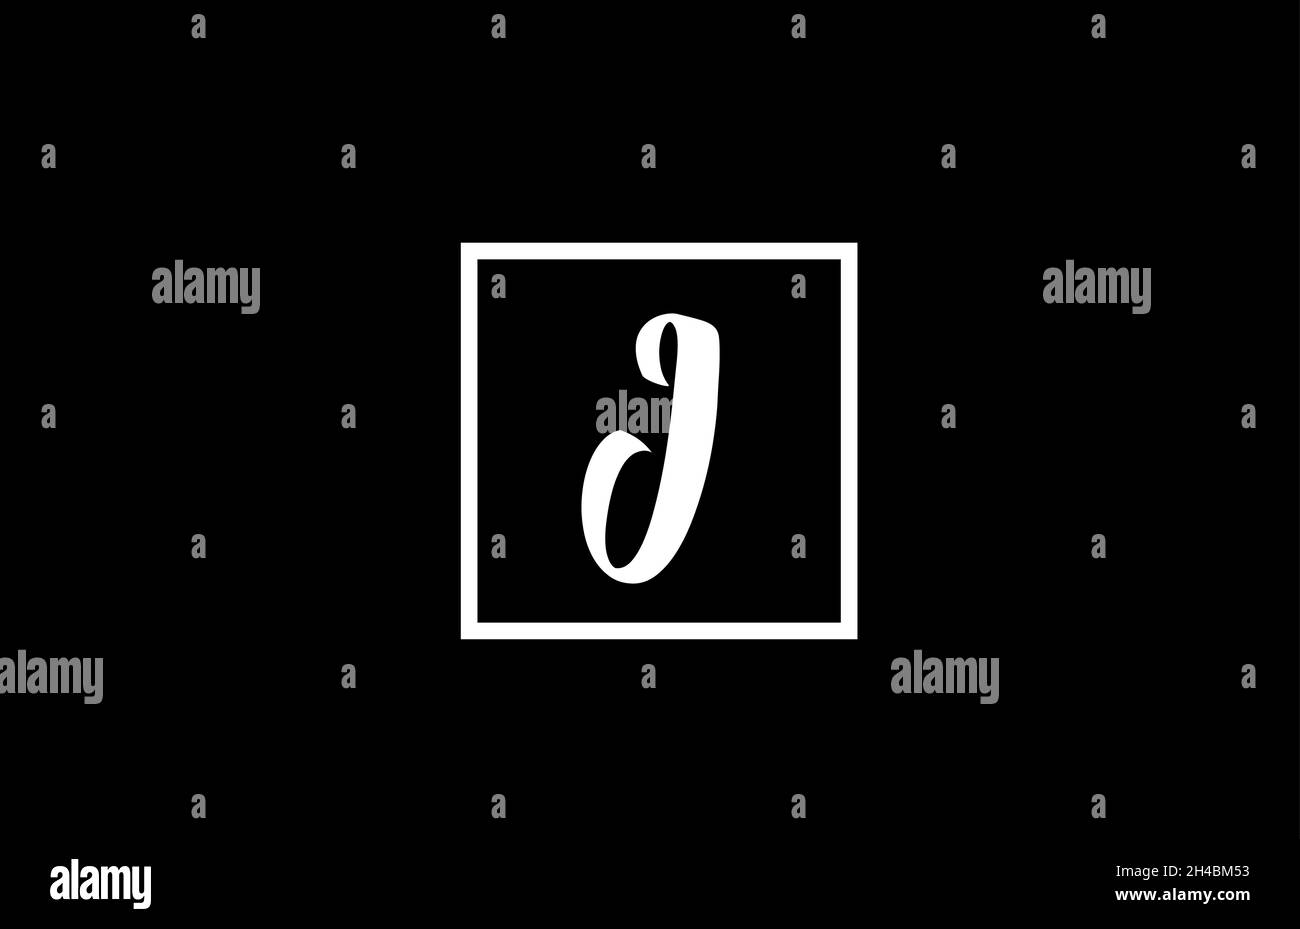 black and white J alphabet letter logo icon. Simple square design for company and business Stock Vector